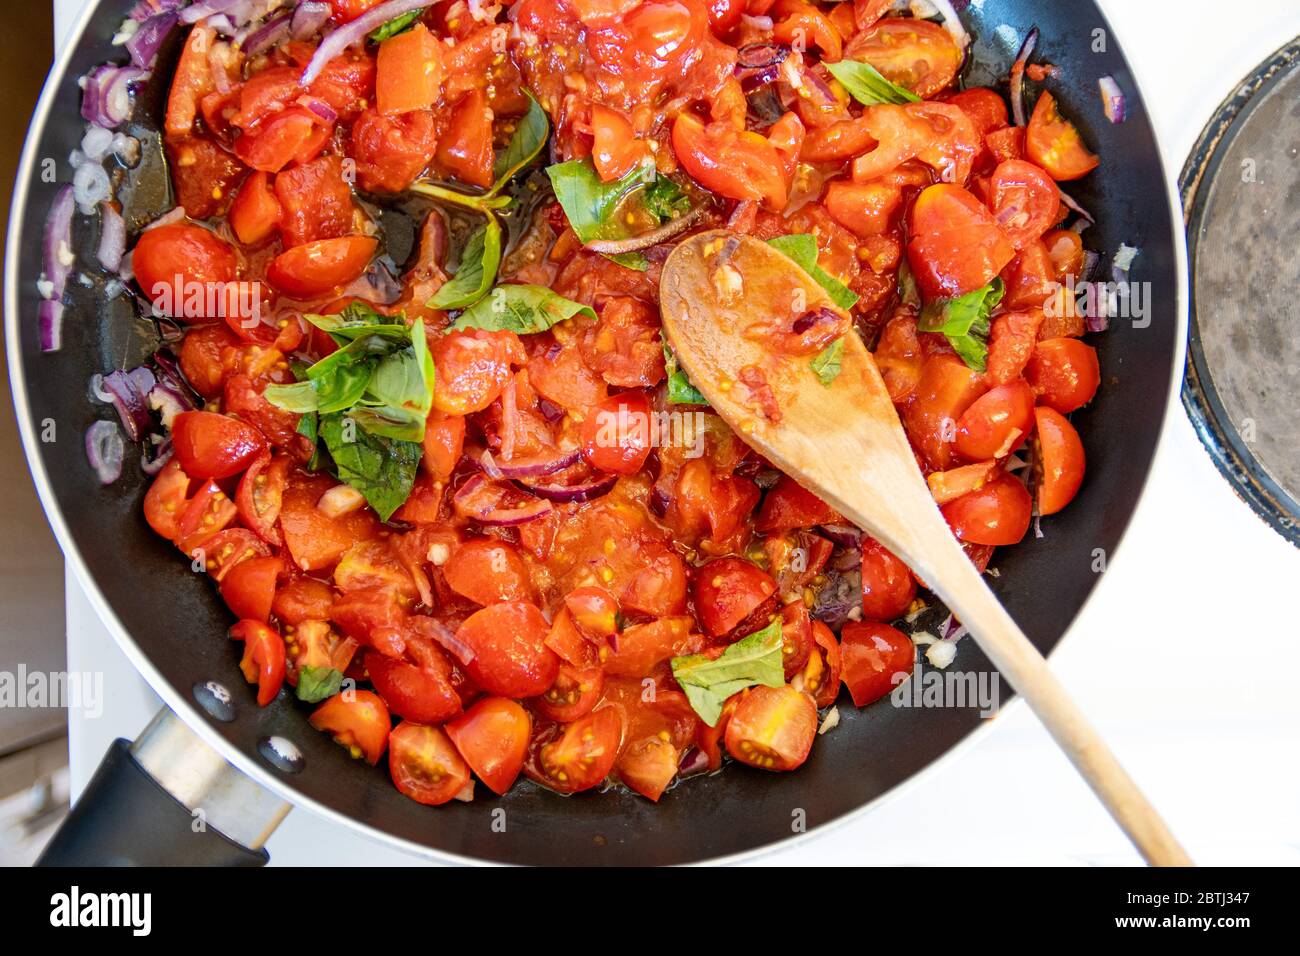 Delicious home made tomato and basil pasta sauce on the hob simmering and cooking Stock Photo